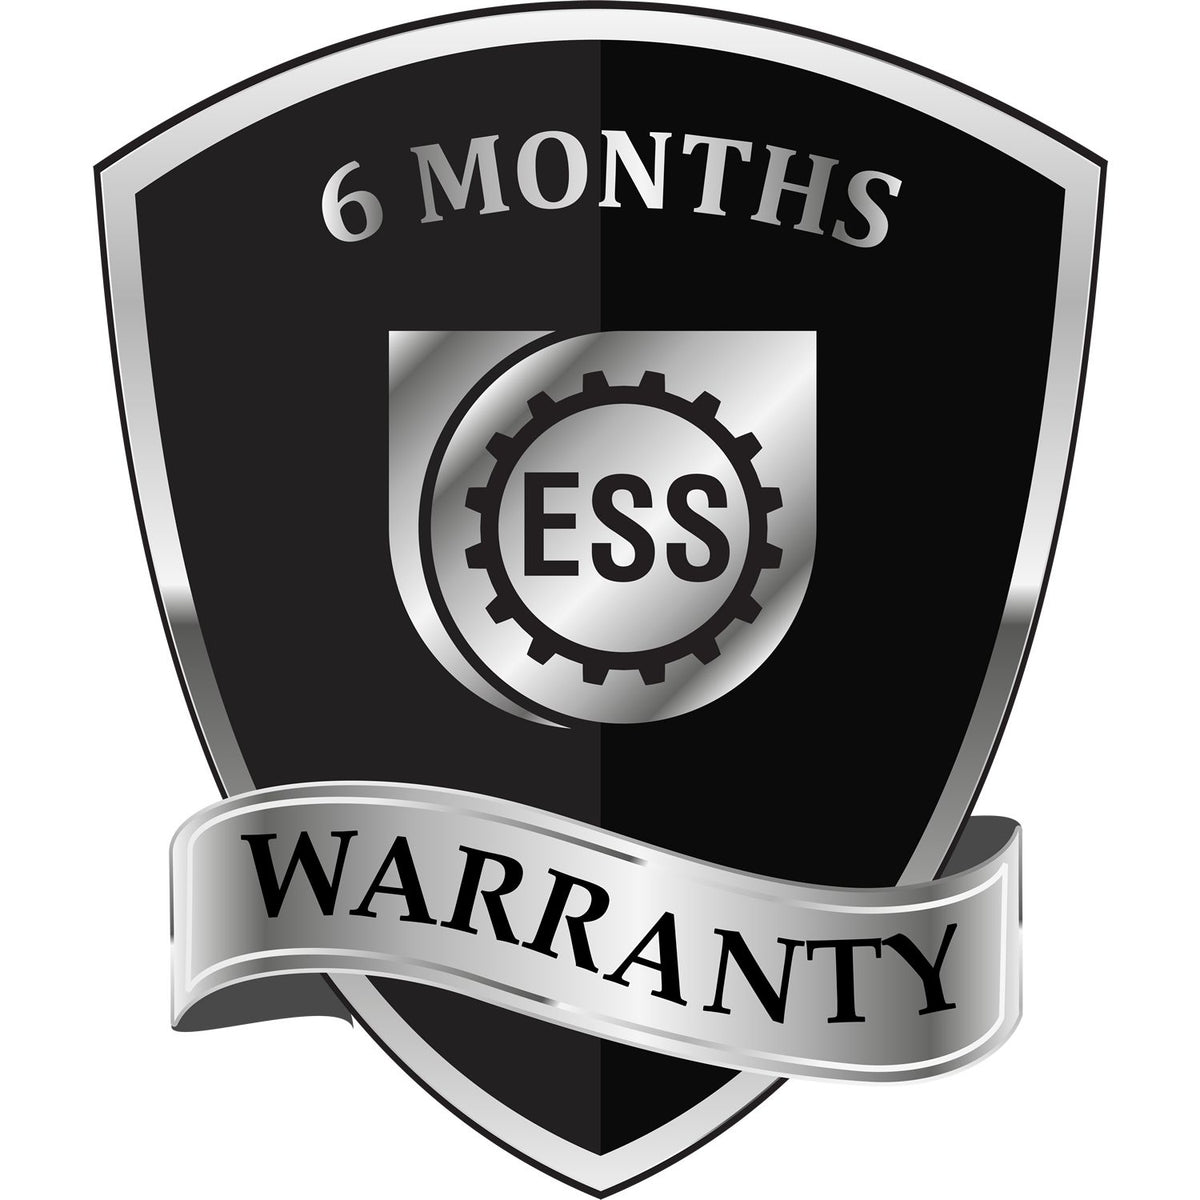 A badge or emblem showing a warranty icon for the Maine Professional Engineer Seal Stamp